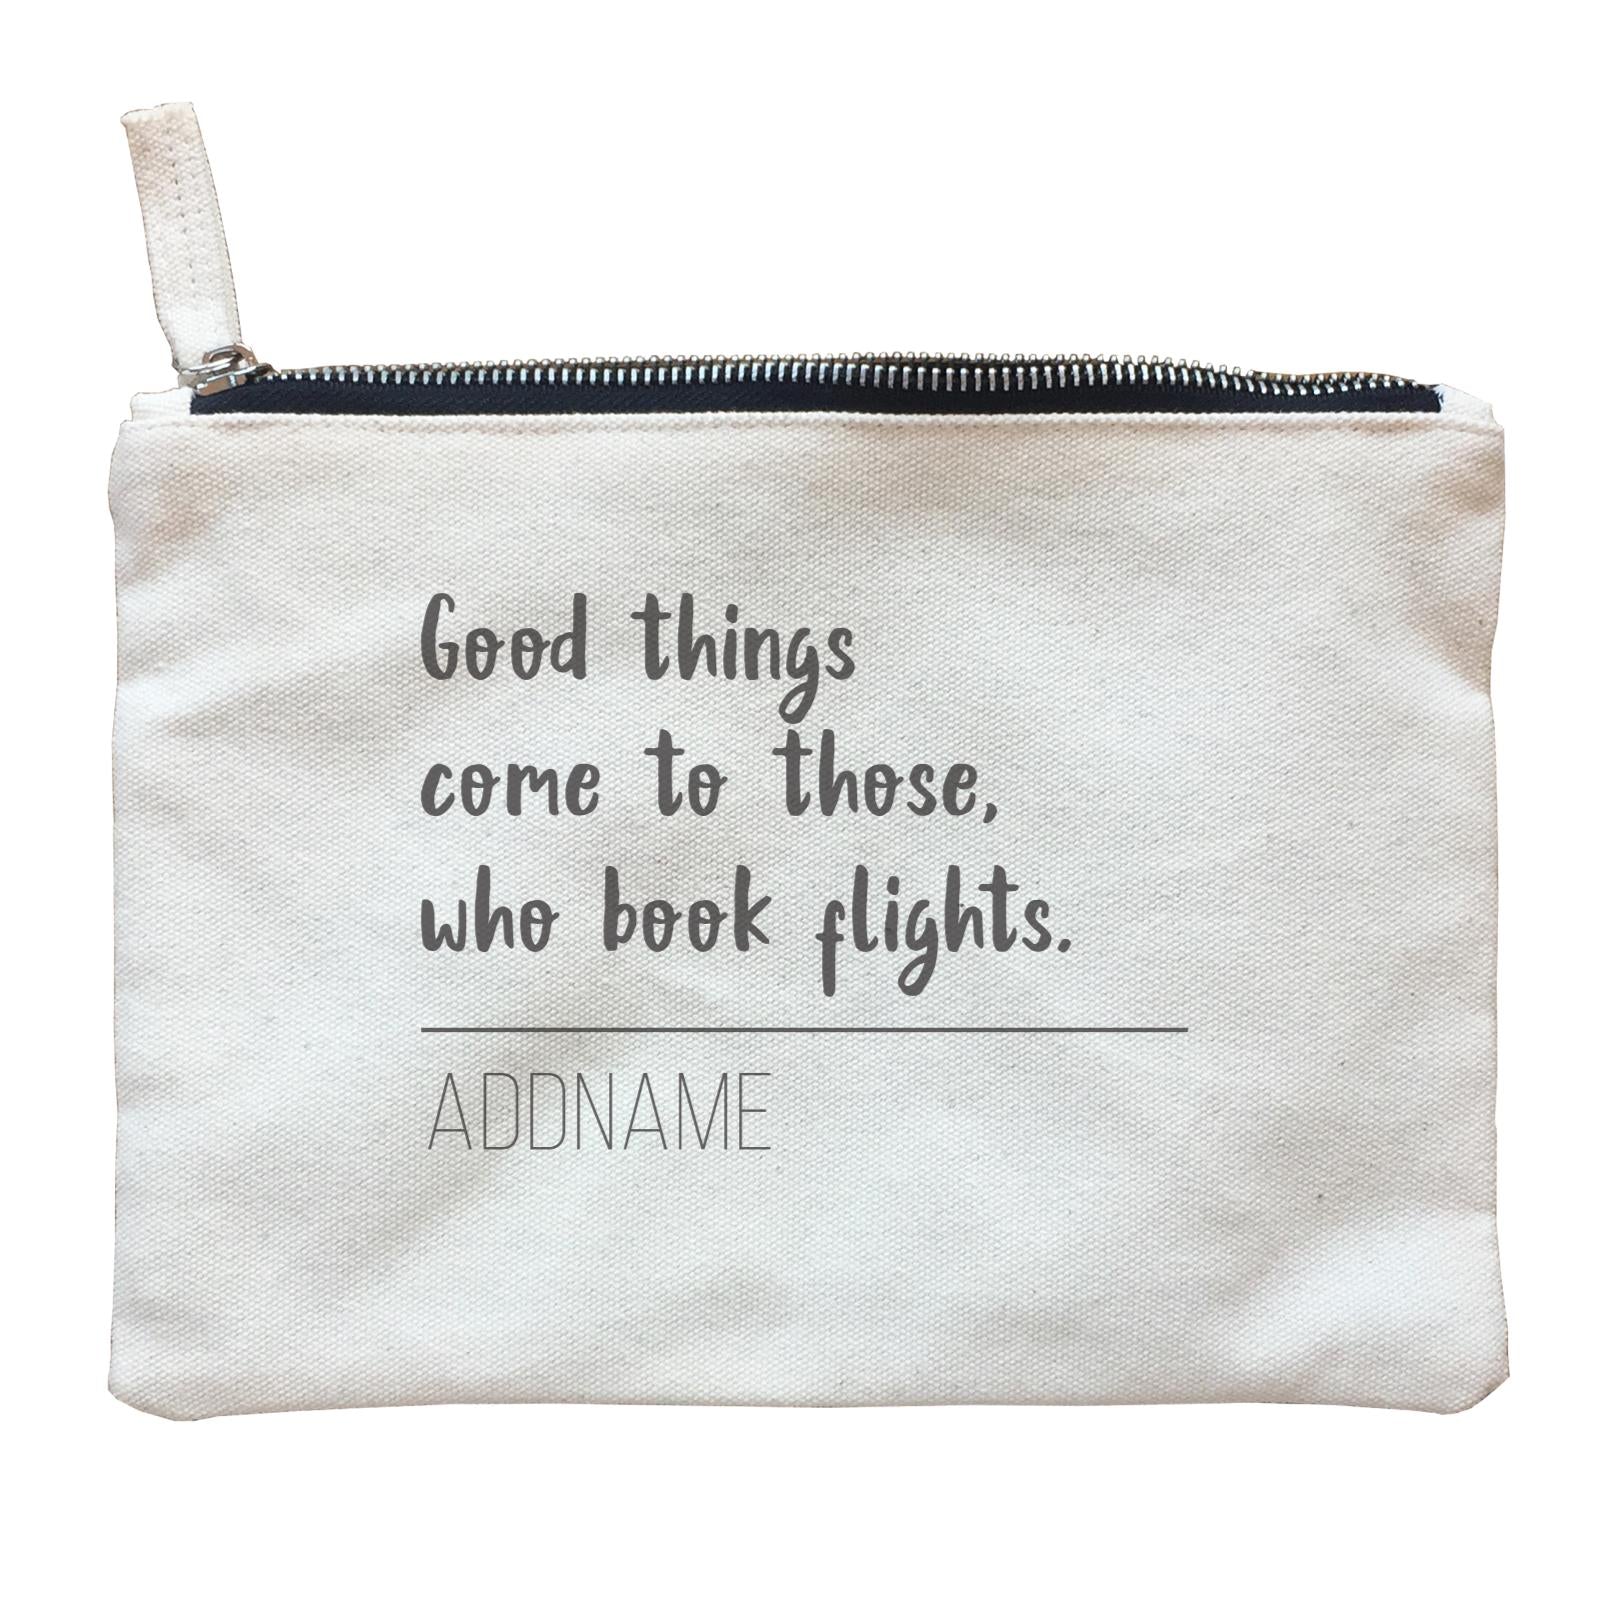 Travel Quotes Good Things Come To Those Who Book Flights Addname Zipper Pouch